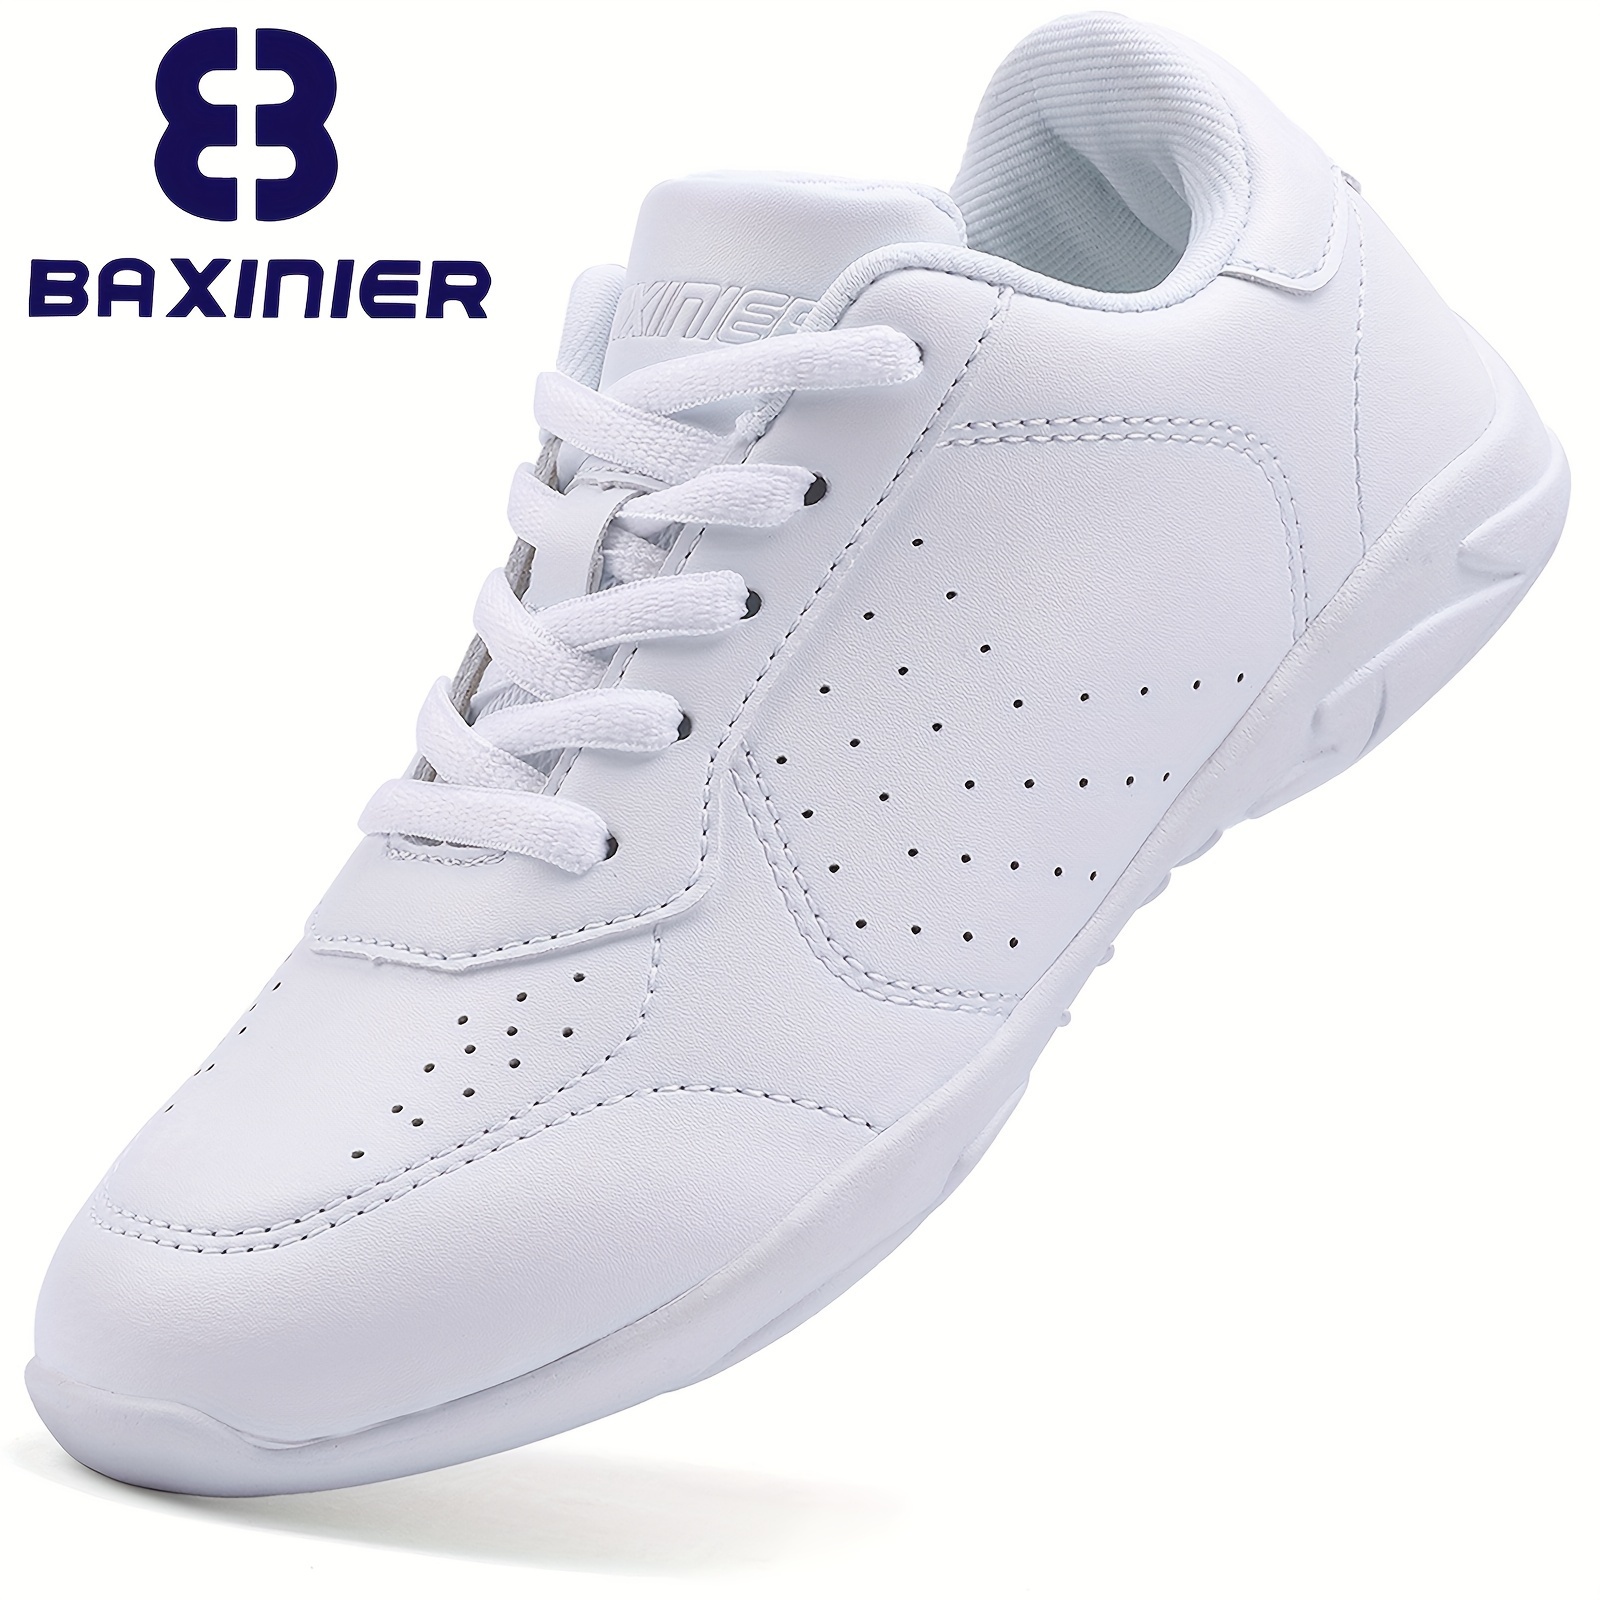 

Baxinier Unisex Kid's Professional Solid Colour Breathable Dance Shoes, Comfy Non Slip Durable Lace Up Cheerleading Shoes For Boy's & Girl's Outdoor Activities